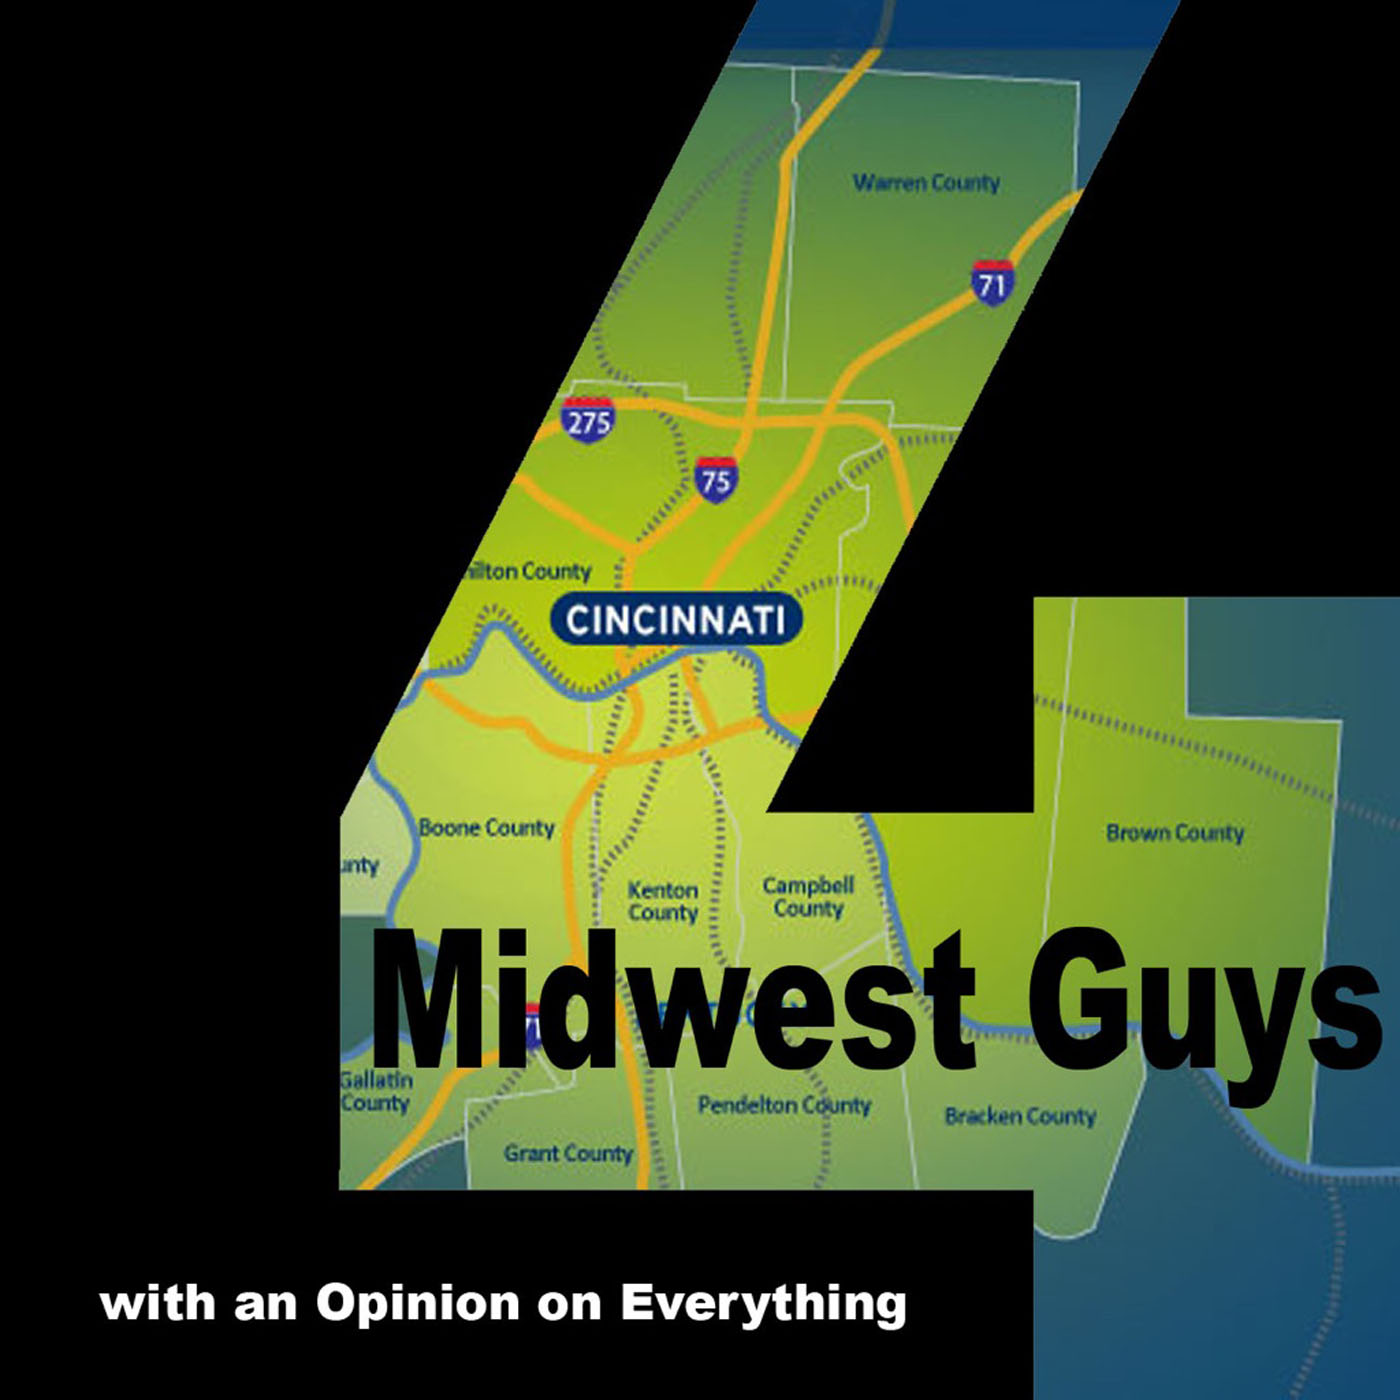 4 MIDWEST GUYS EPISODE 5